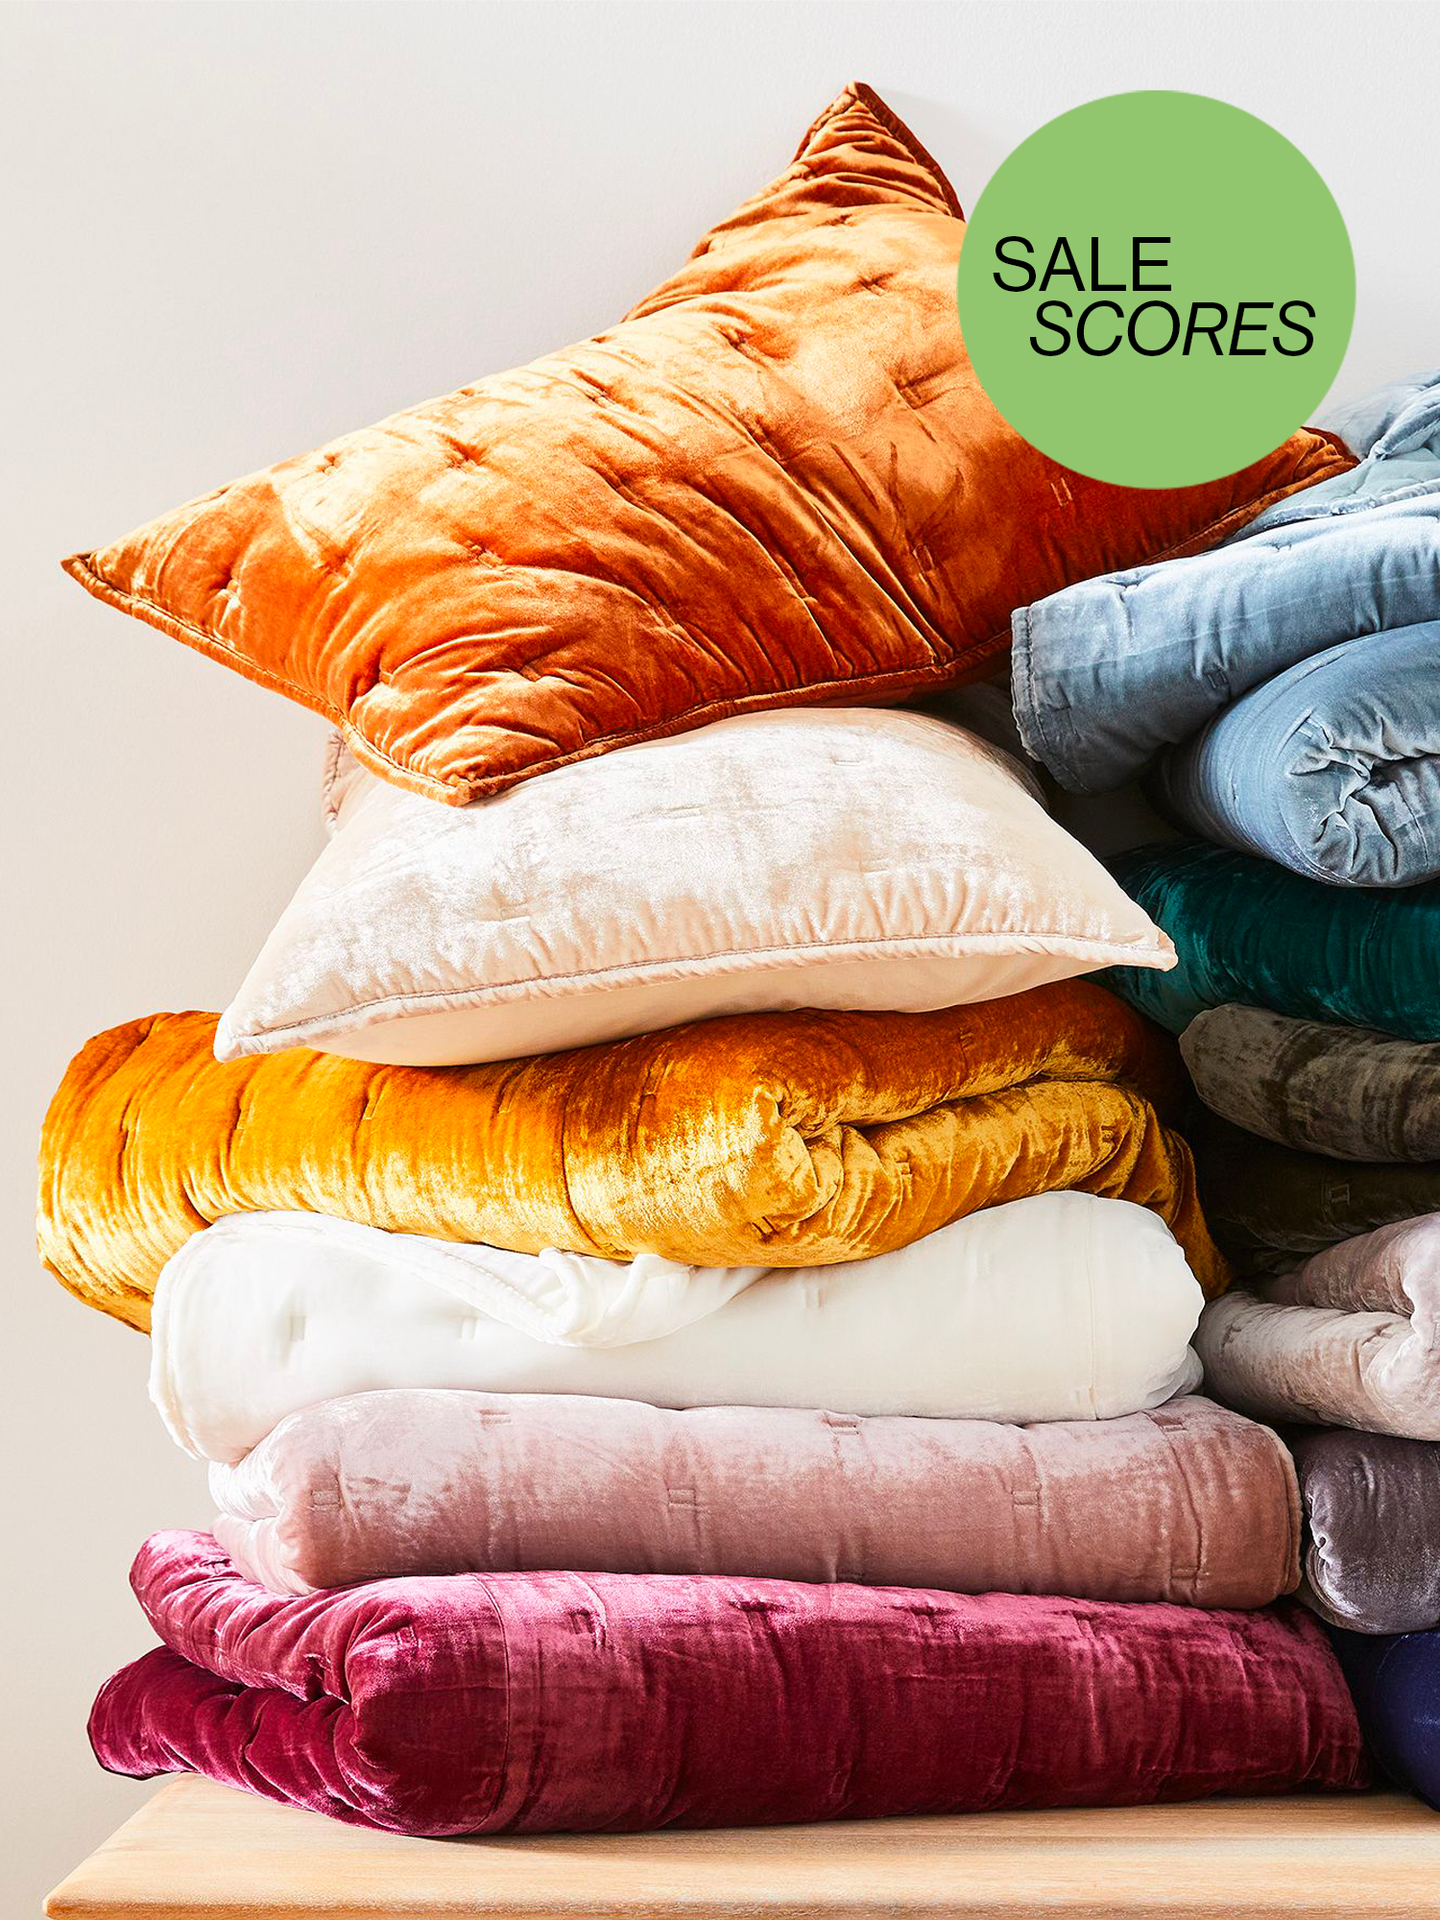 Plush Velvet Quilts and Shams From West Elm in Different, Jewel-Toned Shades Folded Up with Sale Scores Button